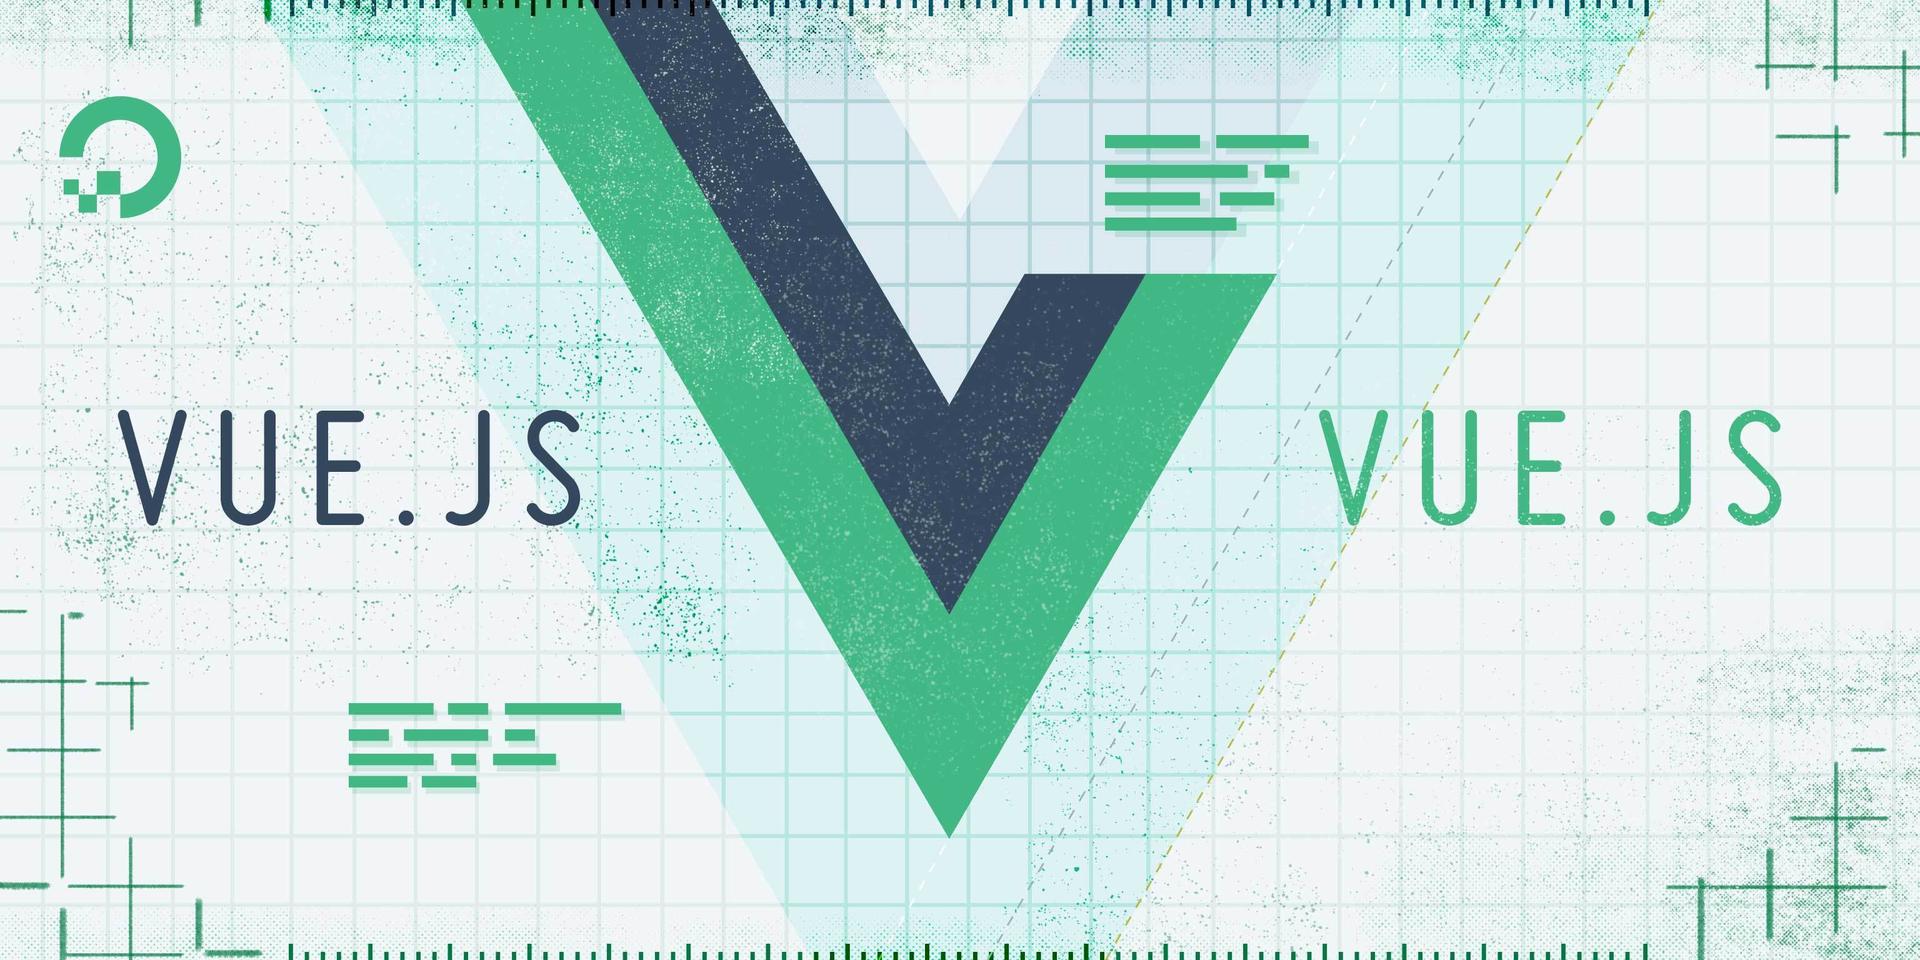 How To Navigate Between Views with Vue Router